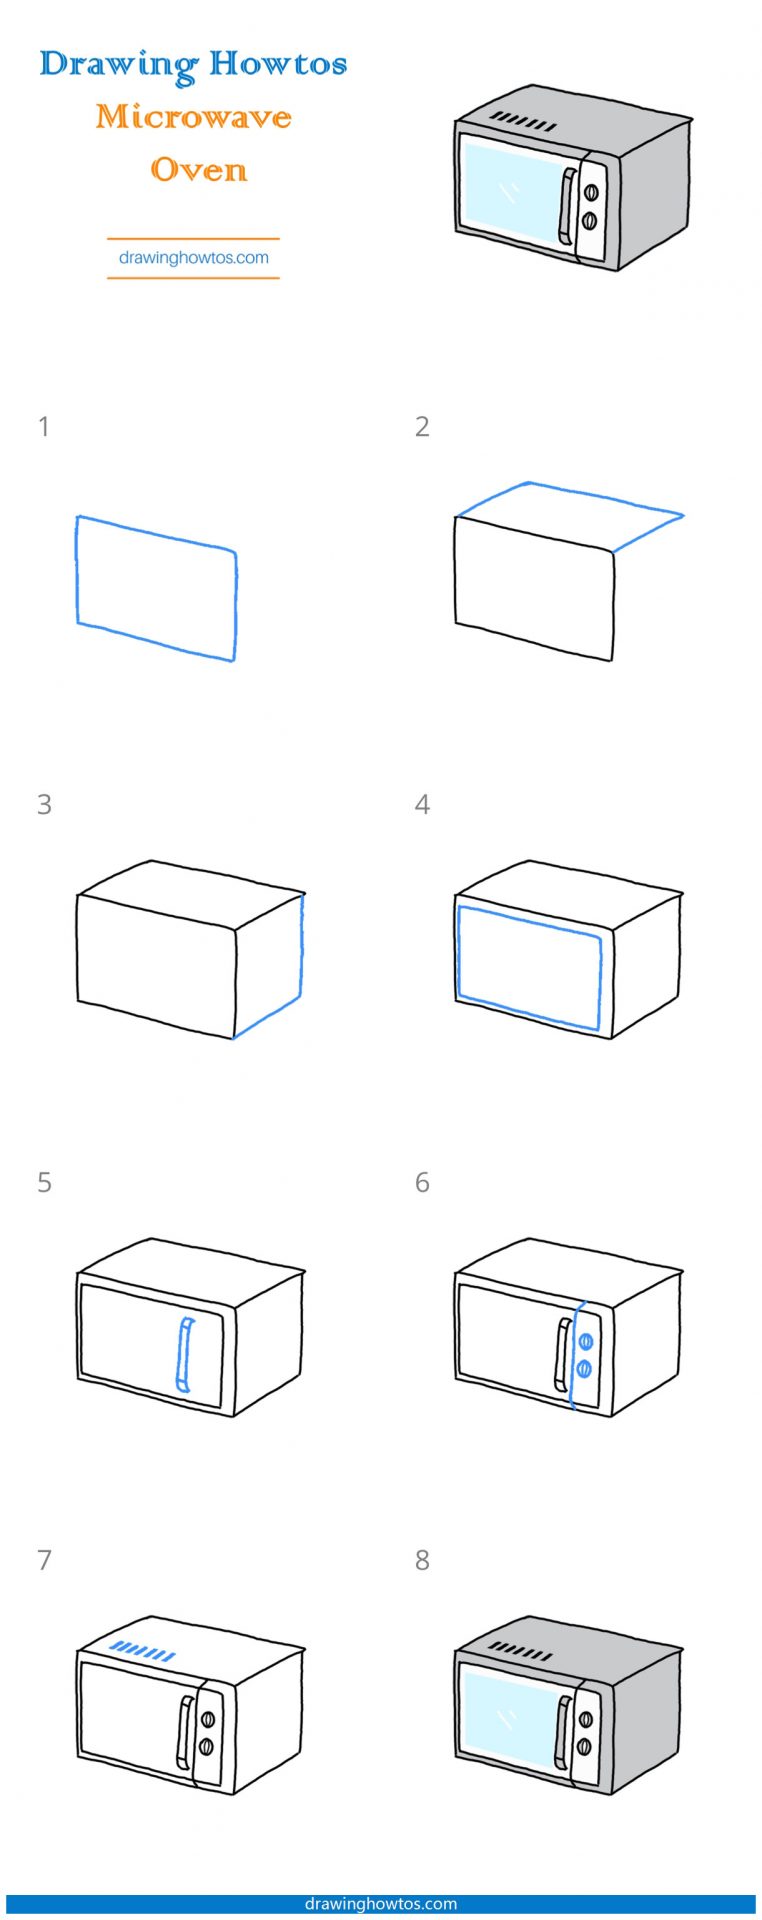 How to Draw a Microwave Oven Step by Step